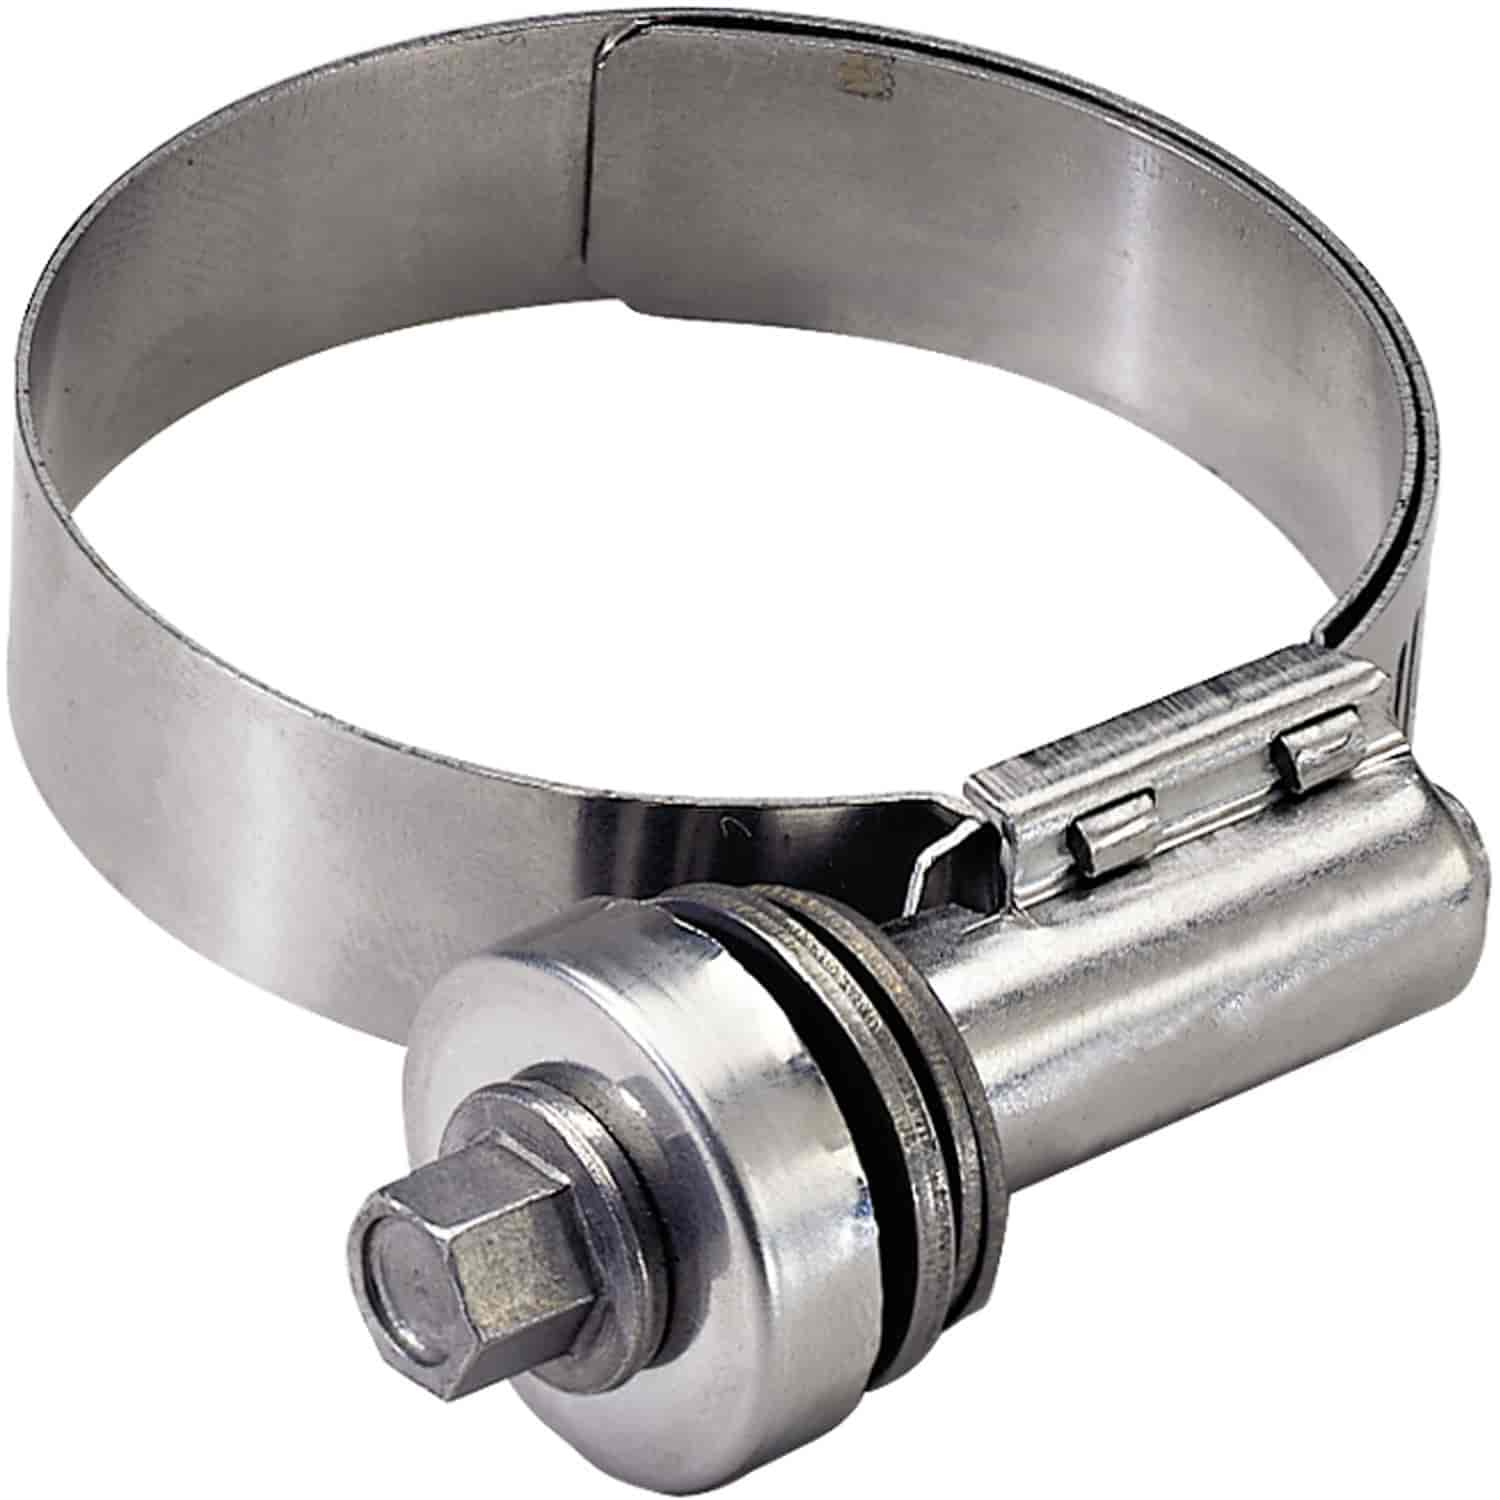 Constant-Tension Hose Clamps Range: .8125" to 1.5"